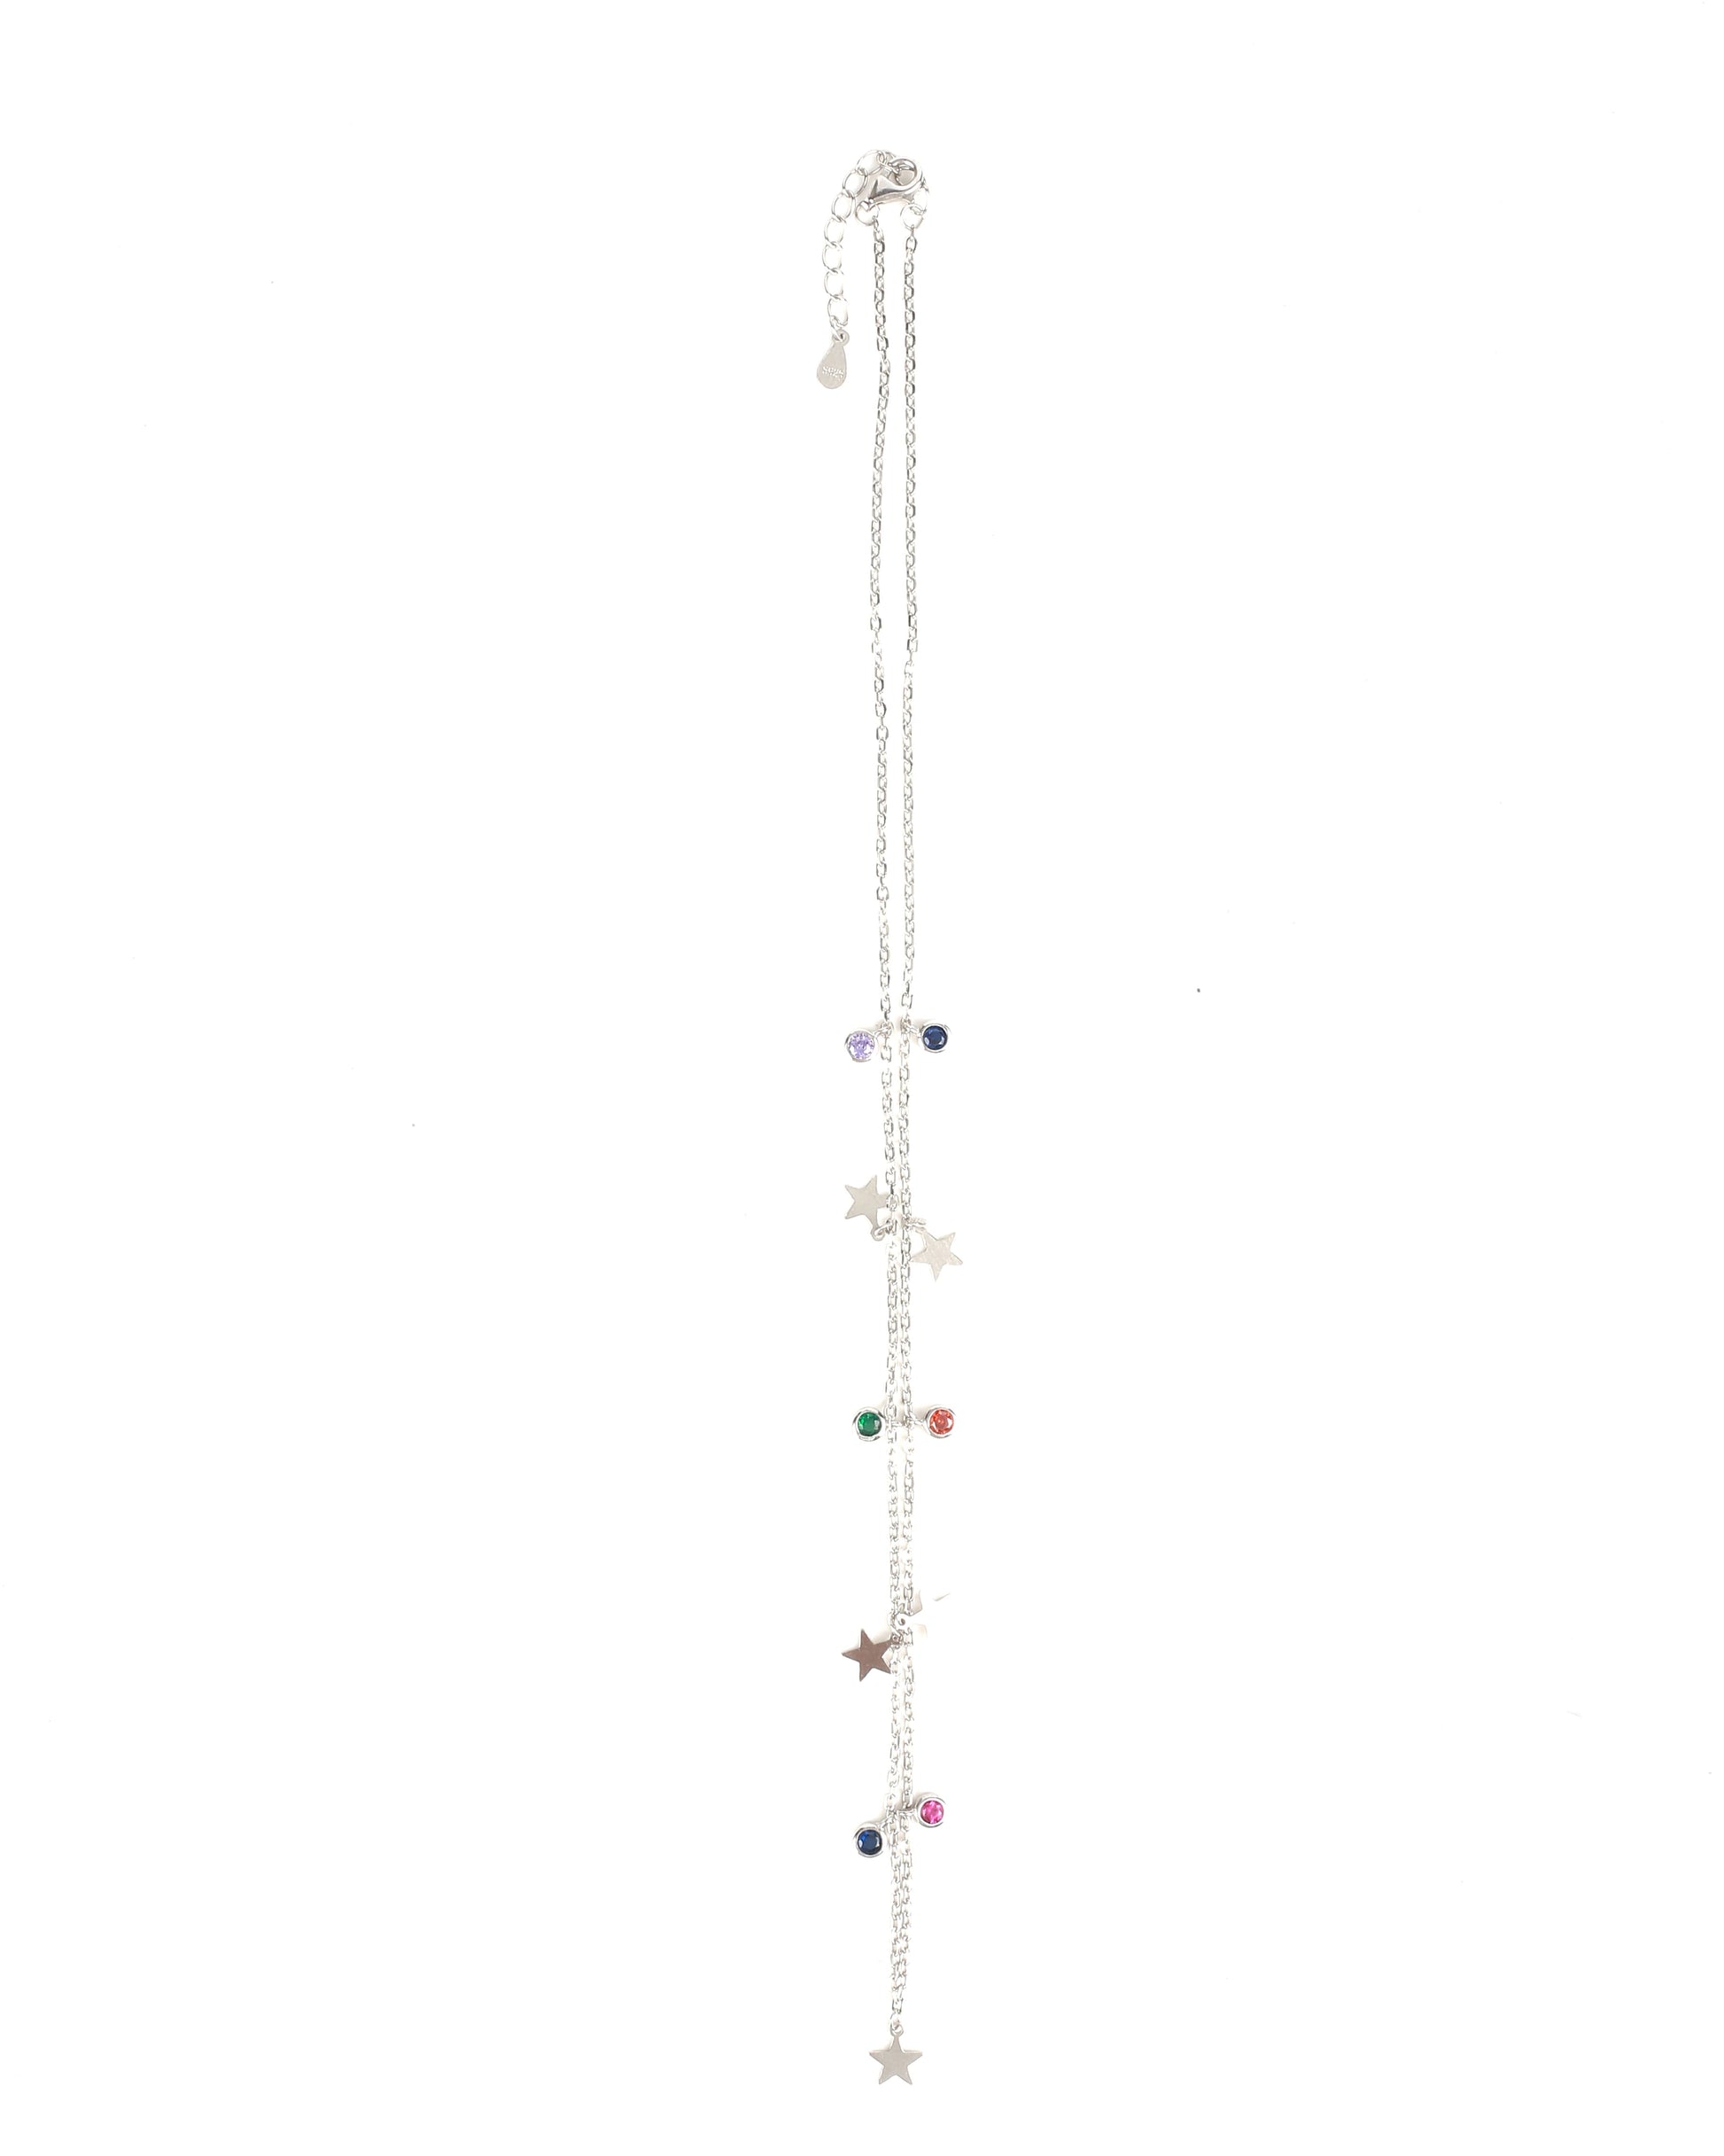 STAR CHARM MULTICOLOR STONE NECKLACE CHAIN FOR GIRLS